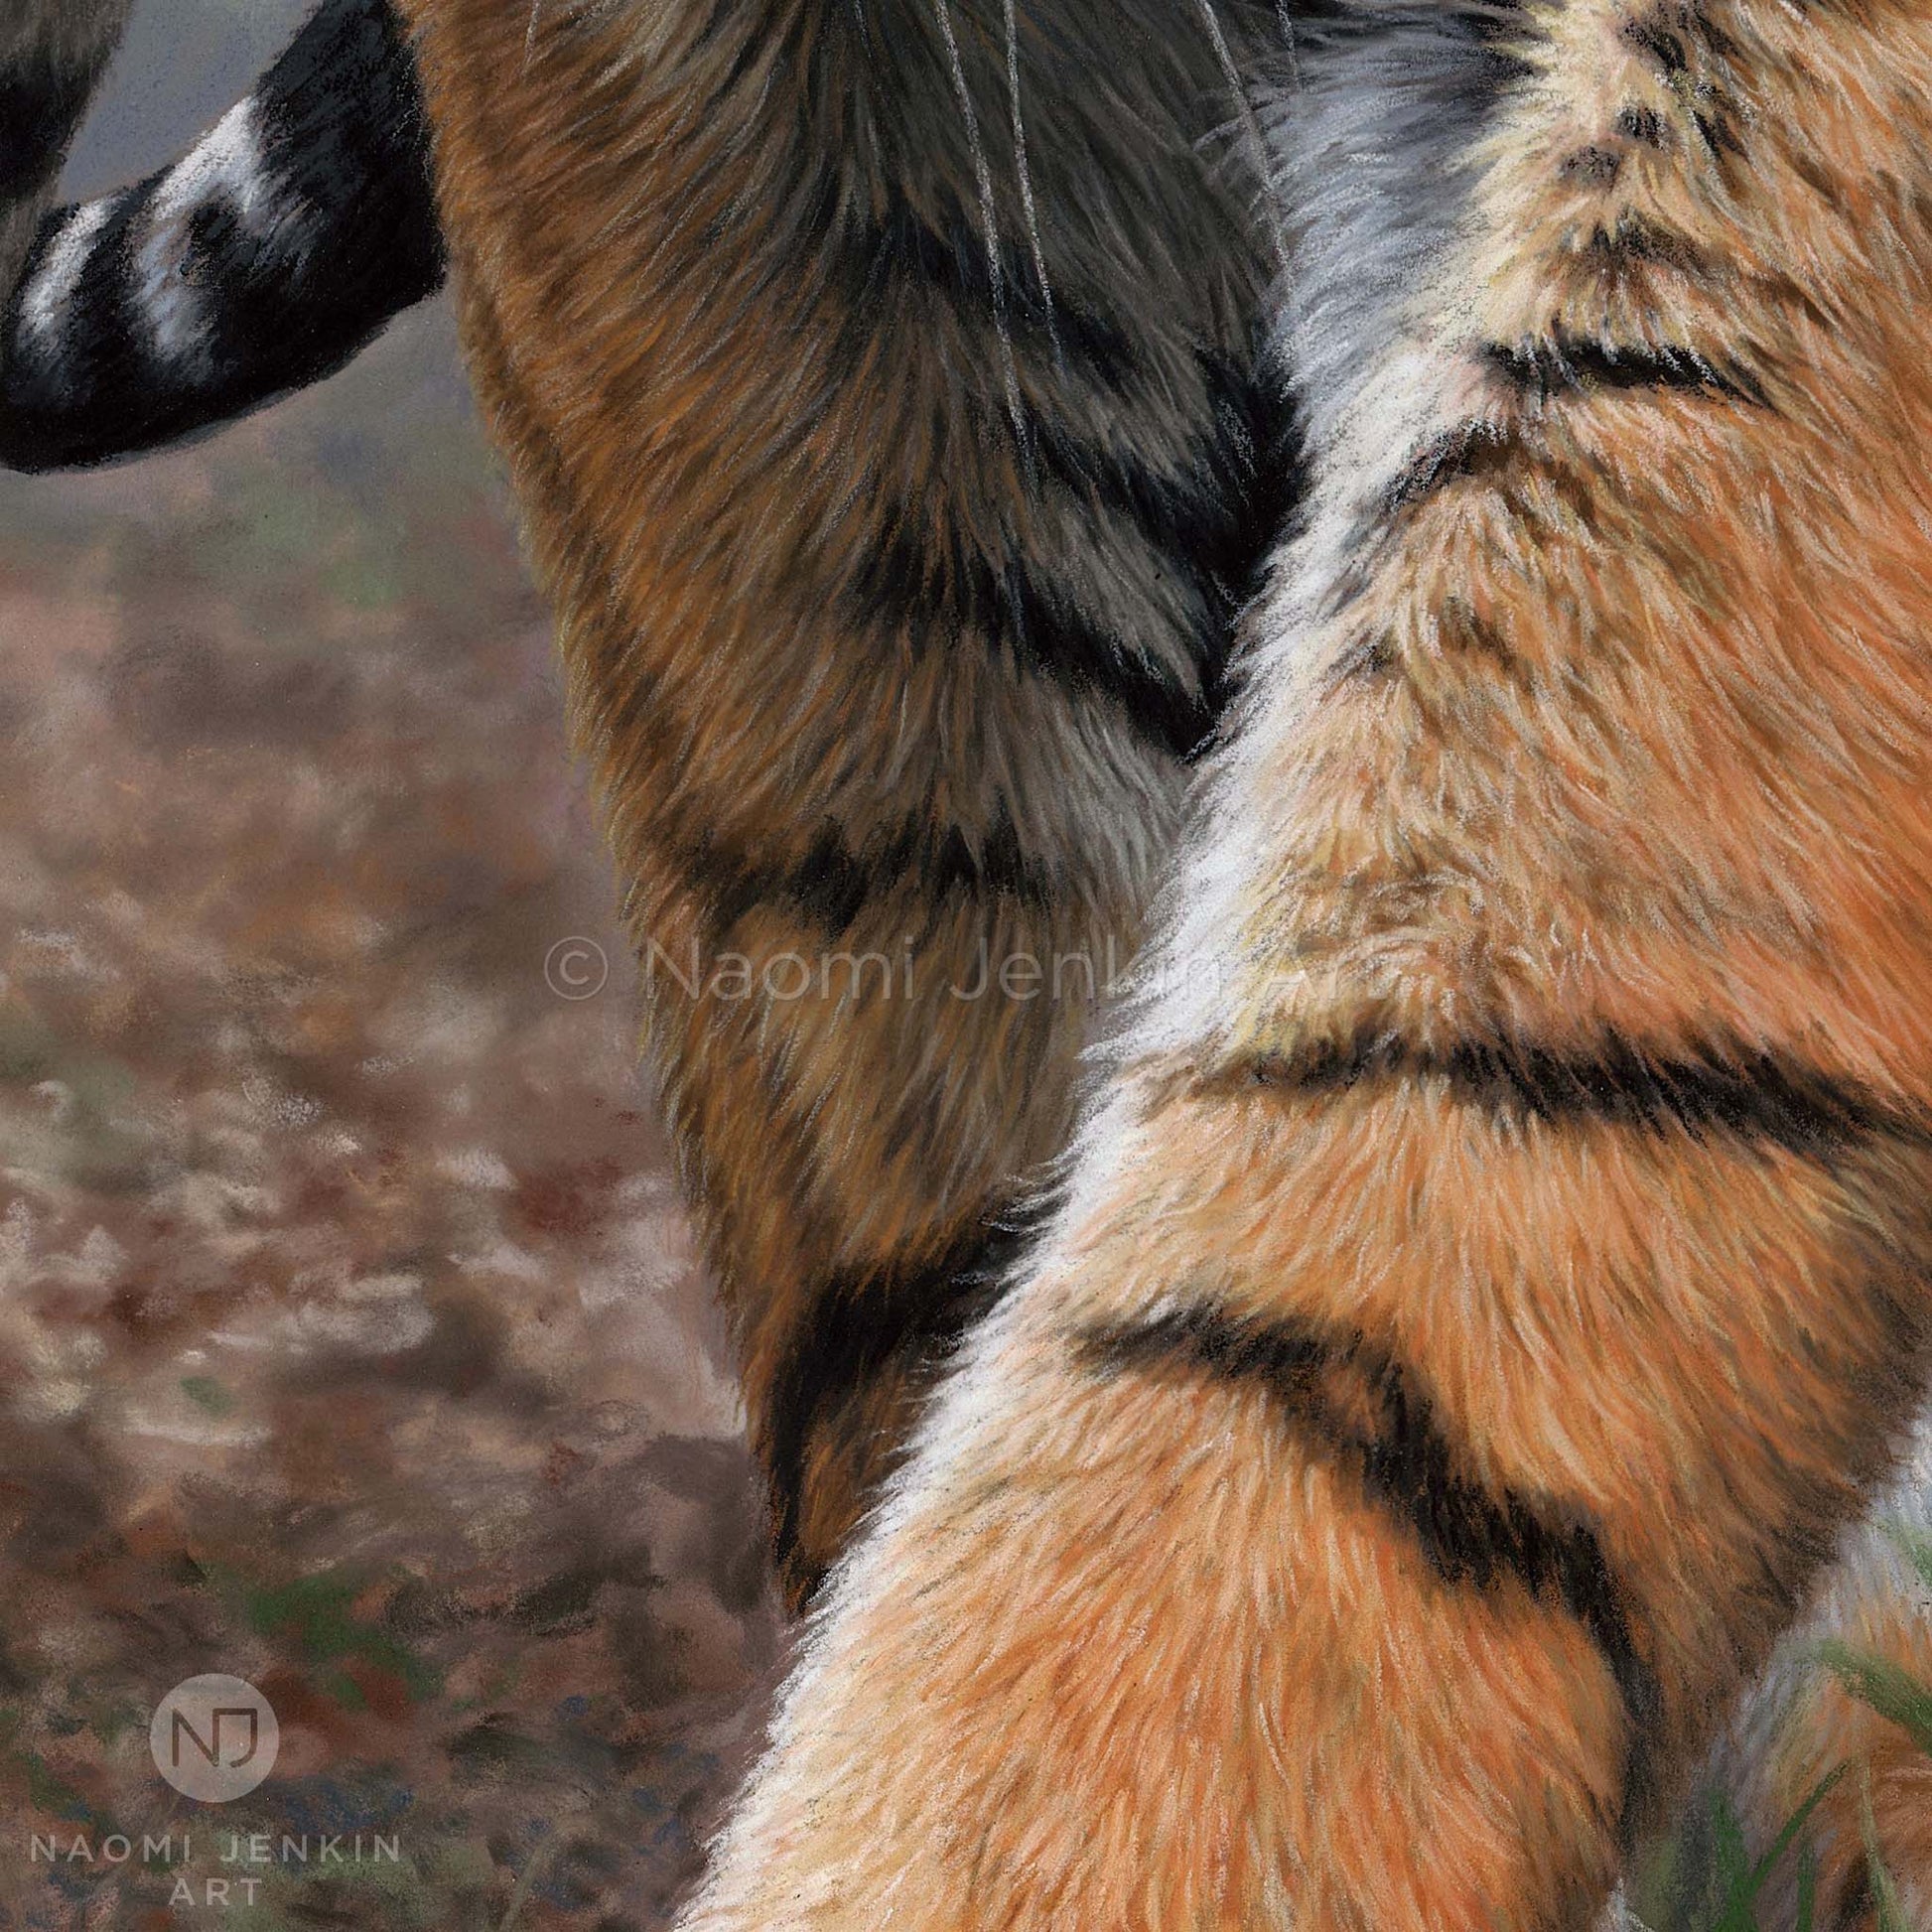 Close up details of a tiger painting "Stealth" by Naomi Jenkin Art.